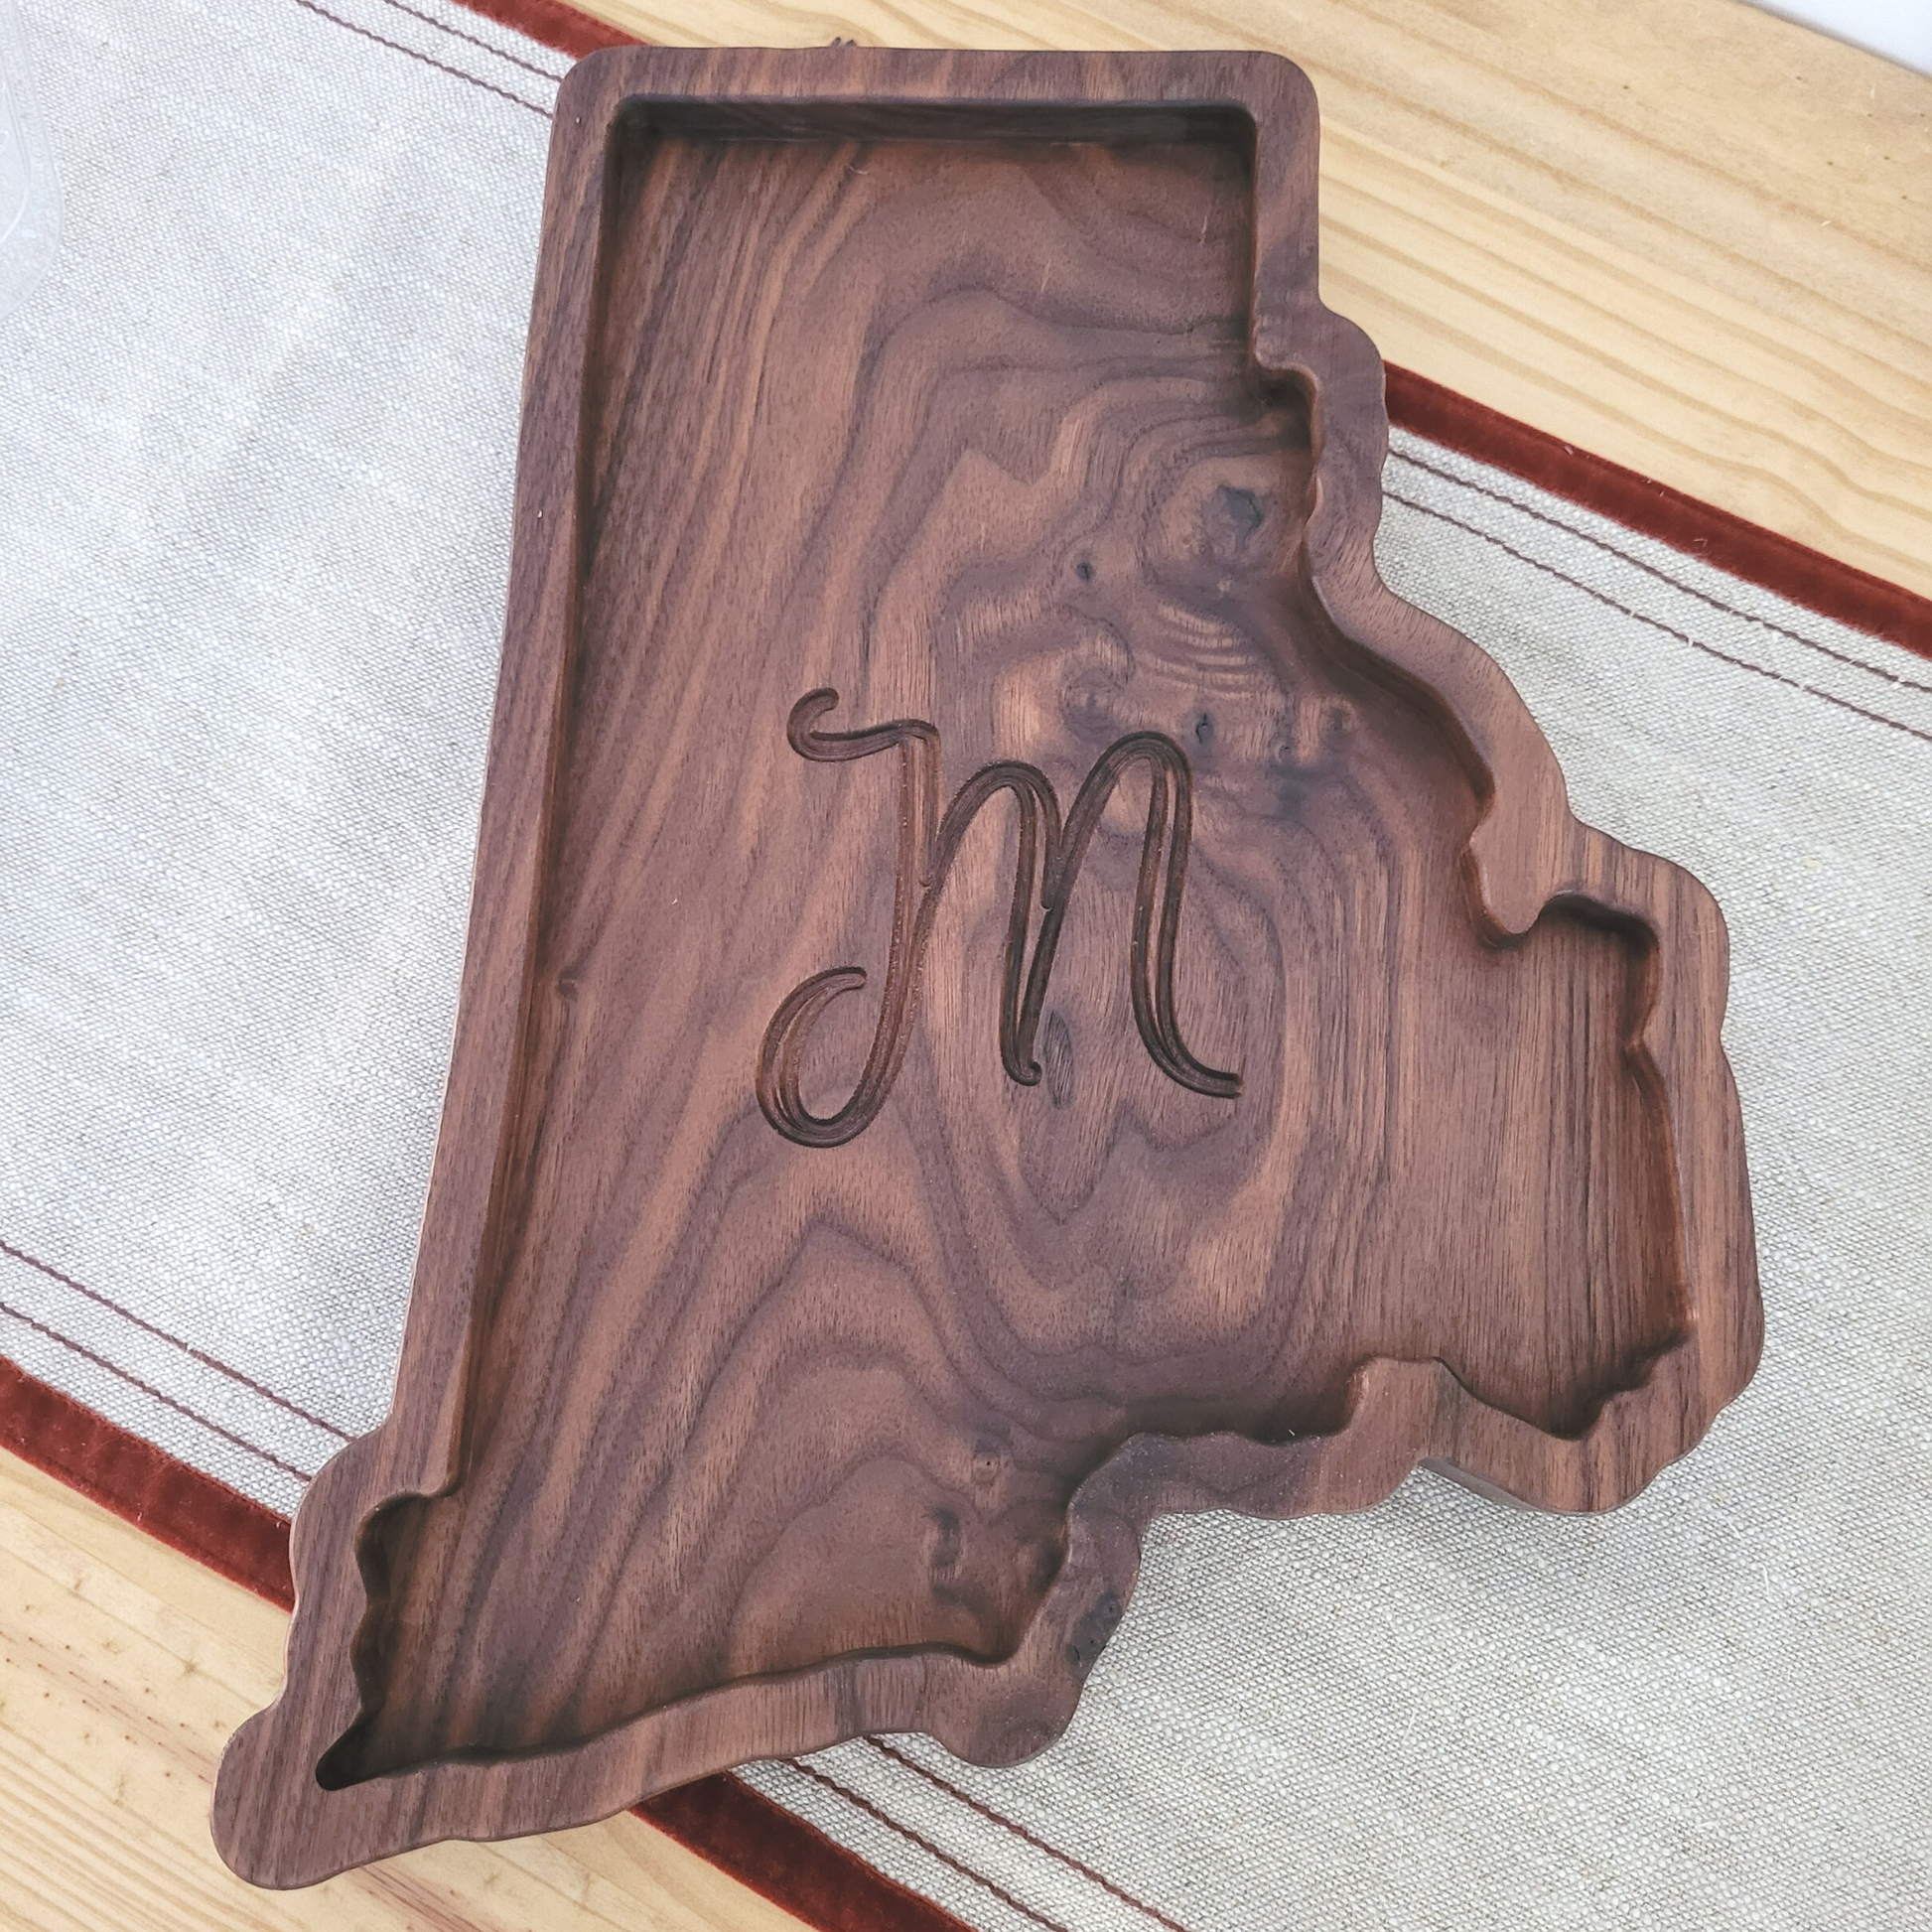 Rhode Island shaped charcuterie board made of walnut and engraved with initial